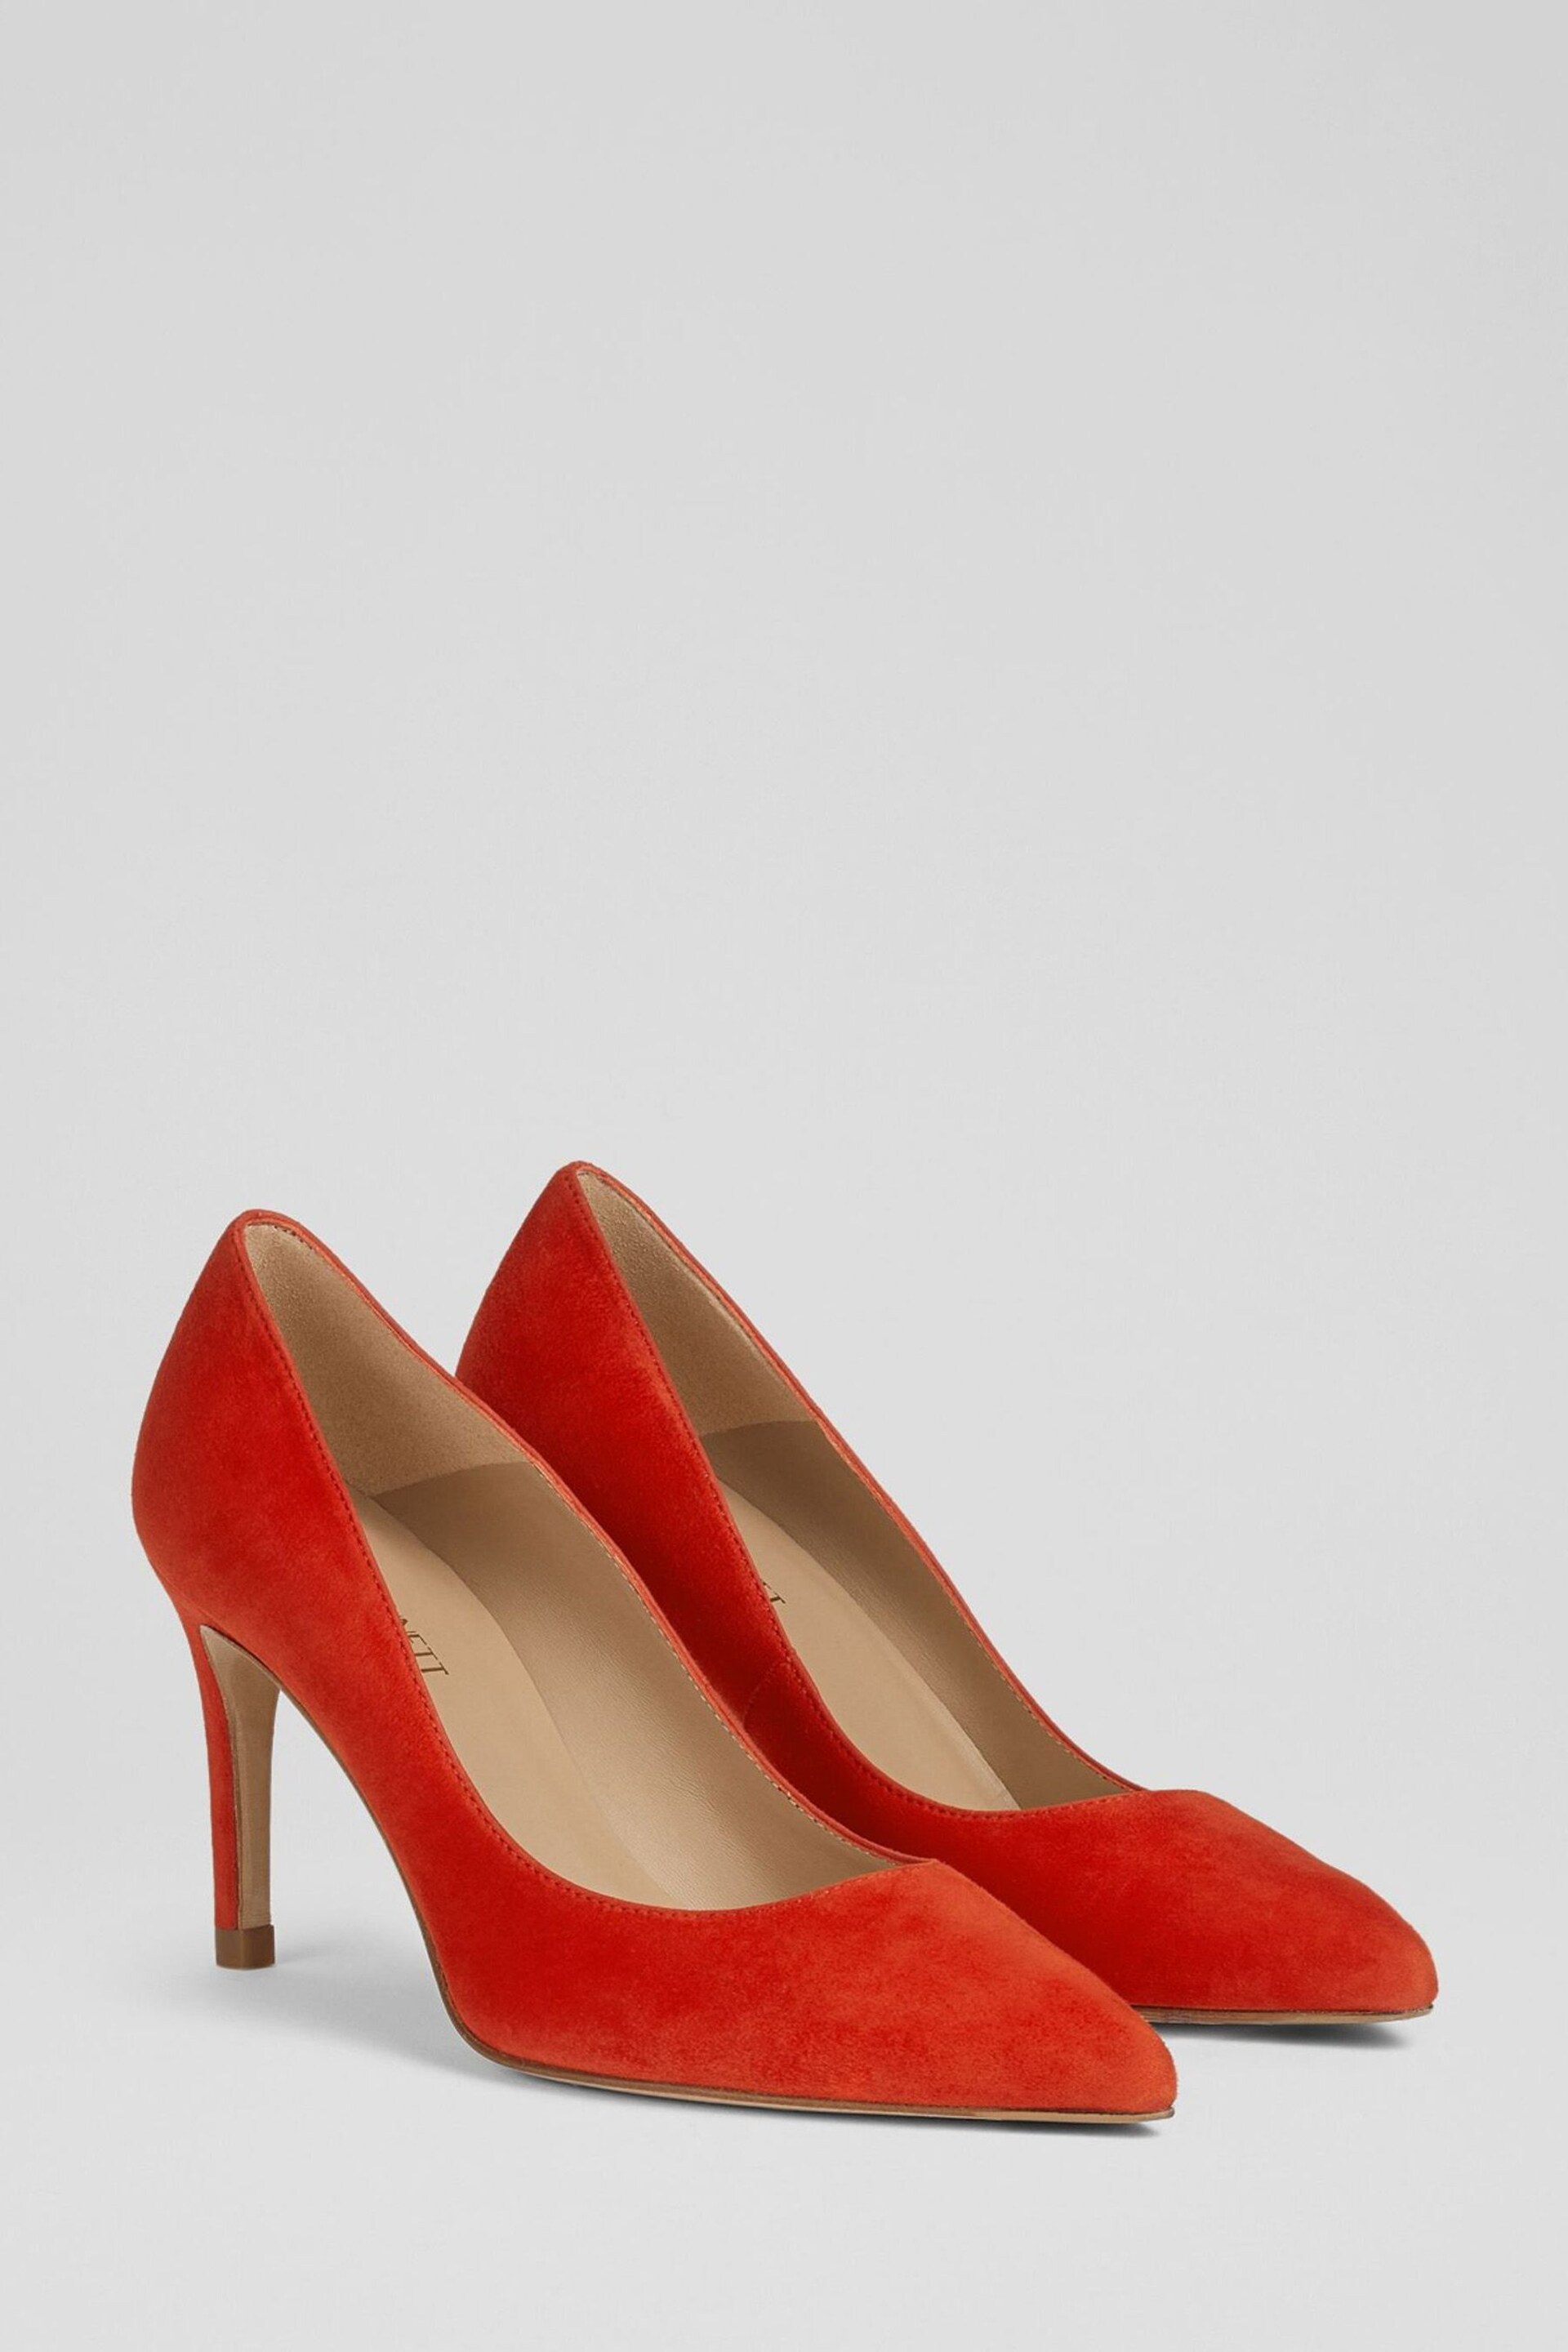 LK Bennett Floret Suede Pointed Toe Courts - Image 2 of 4